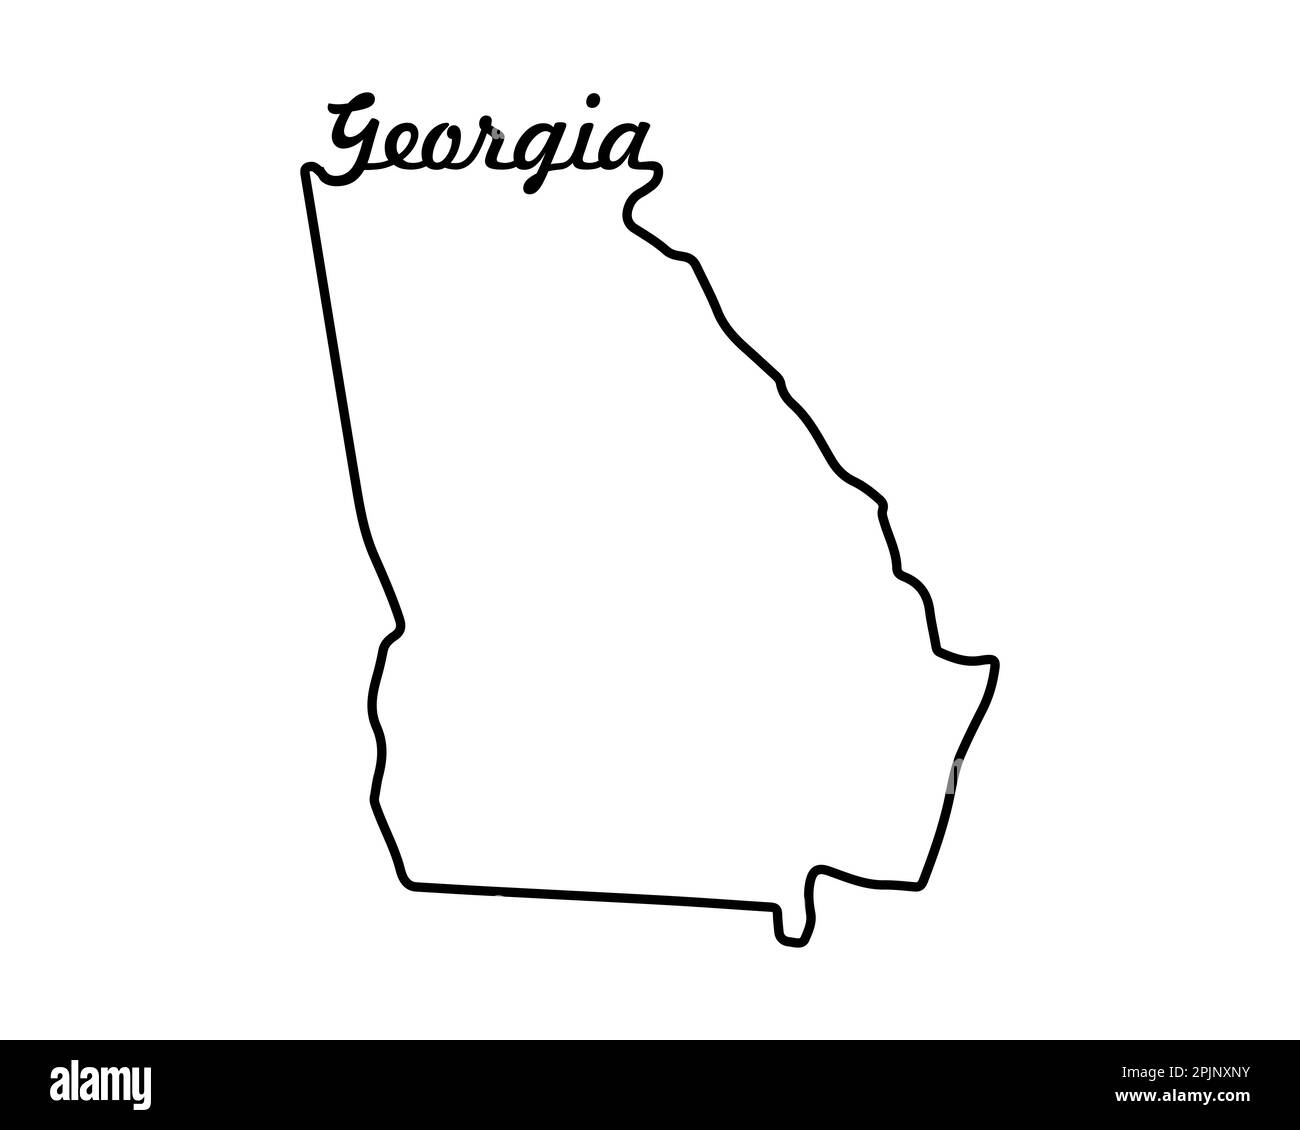 Georgia state map. US state map. Georgia outline symbol. Retro typography. Vector illustration Stock Vector